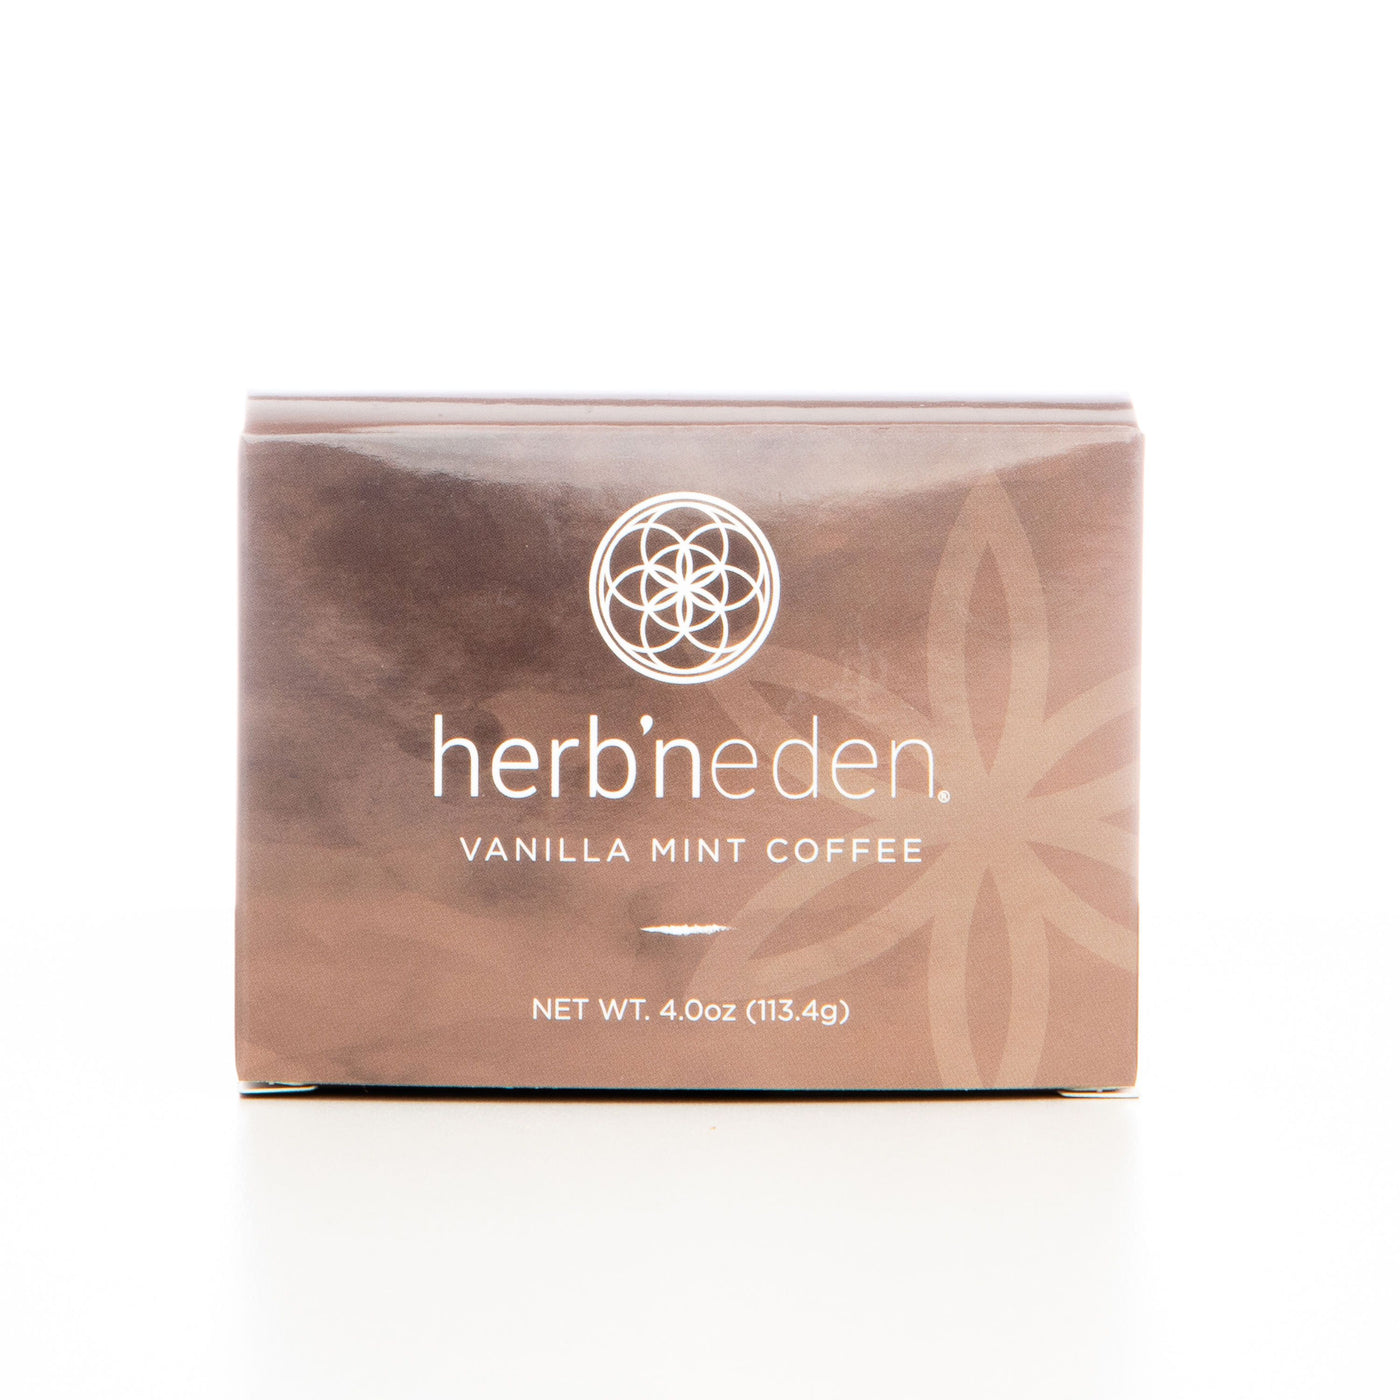 Vanilla Mint Coffee (included in the bundle)